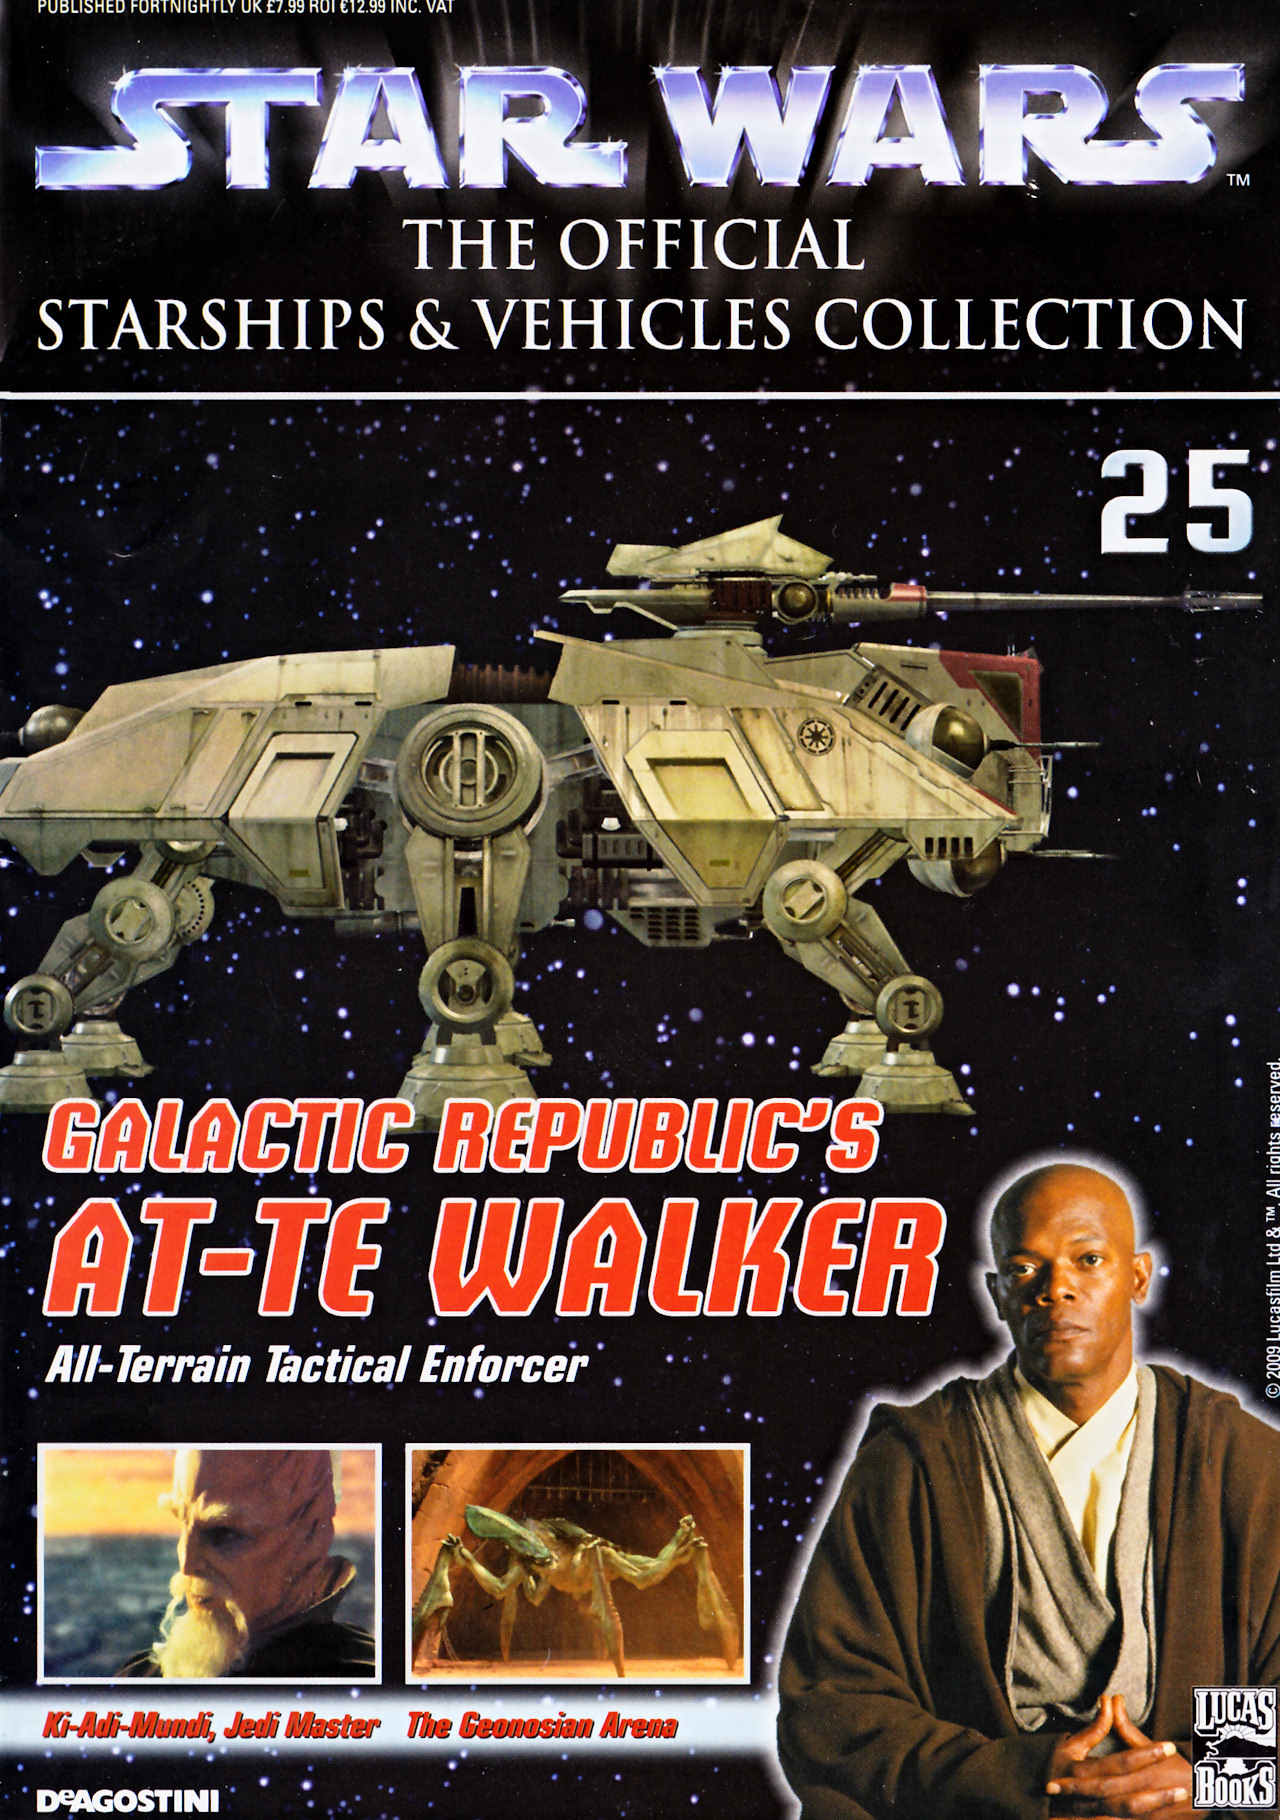 Star Wars: The Official Starships & Vehicles Collection 25 